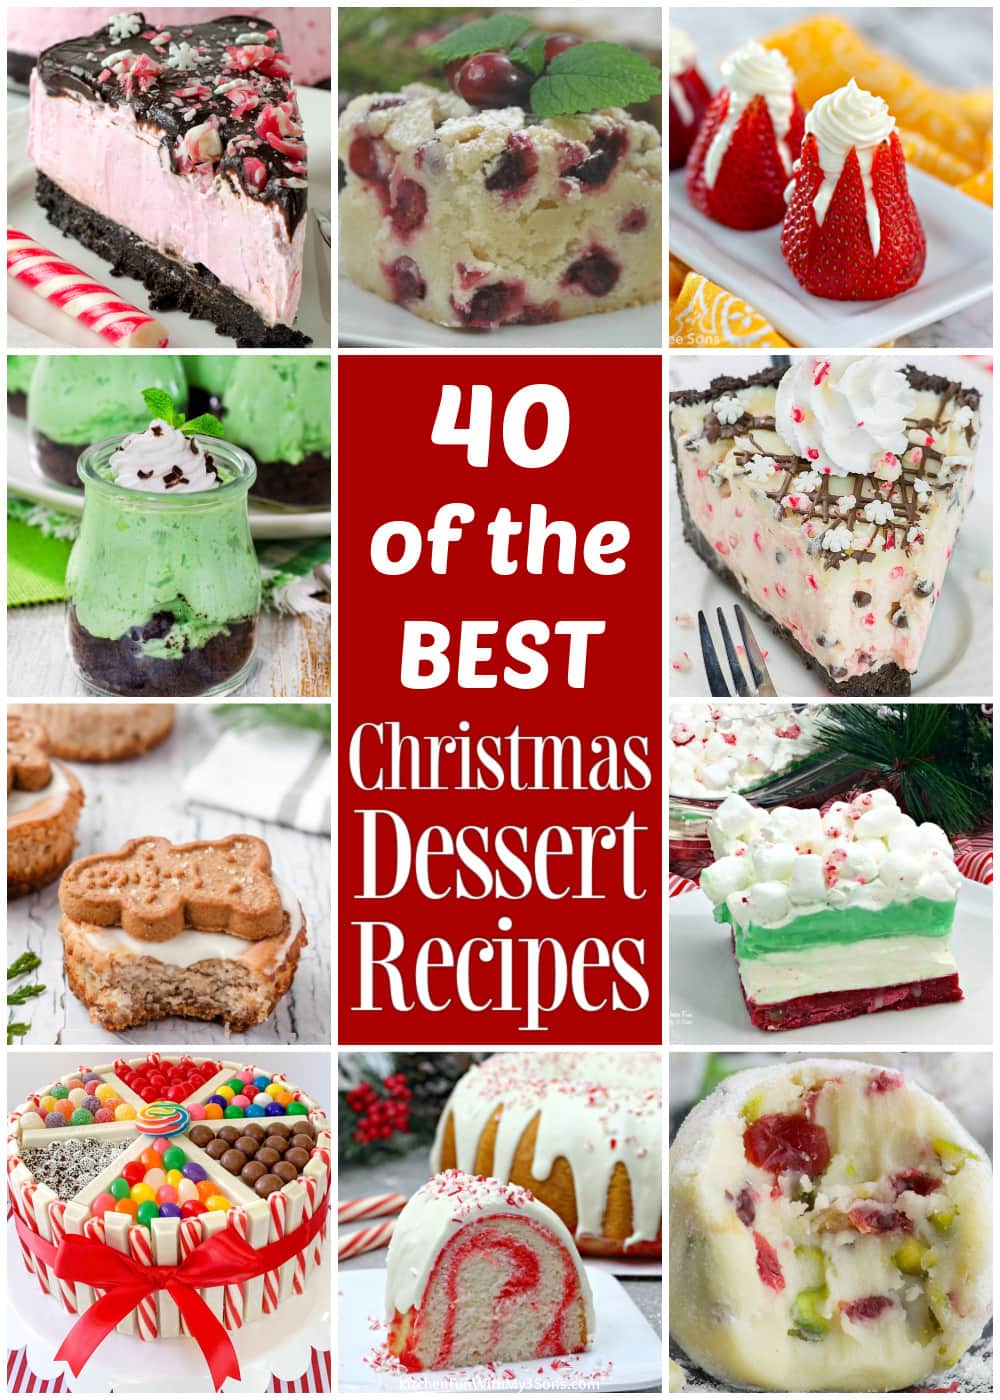 40 of the BEST Christmas Desserts Kitchen Fun With My 3 Sons